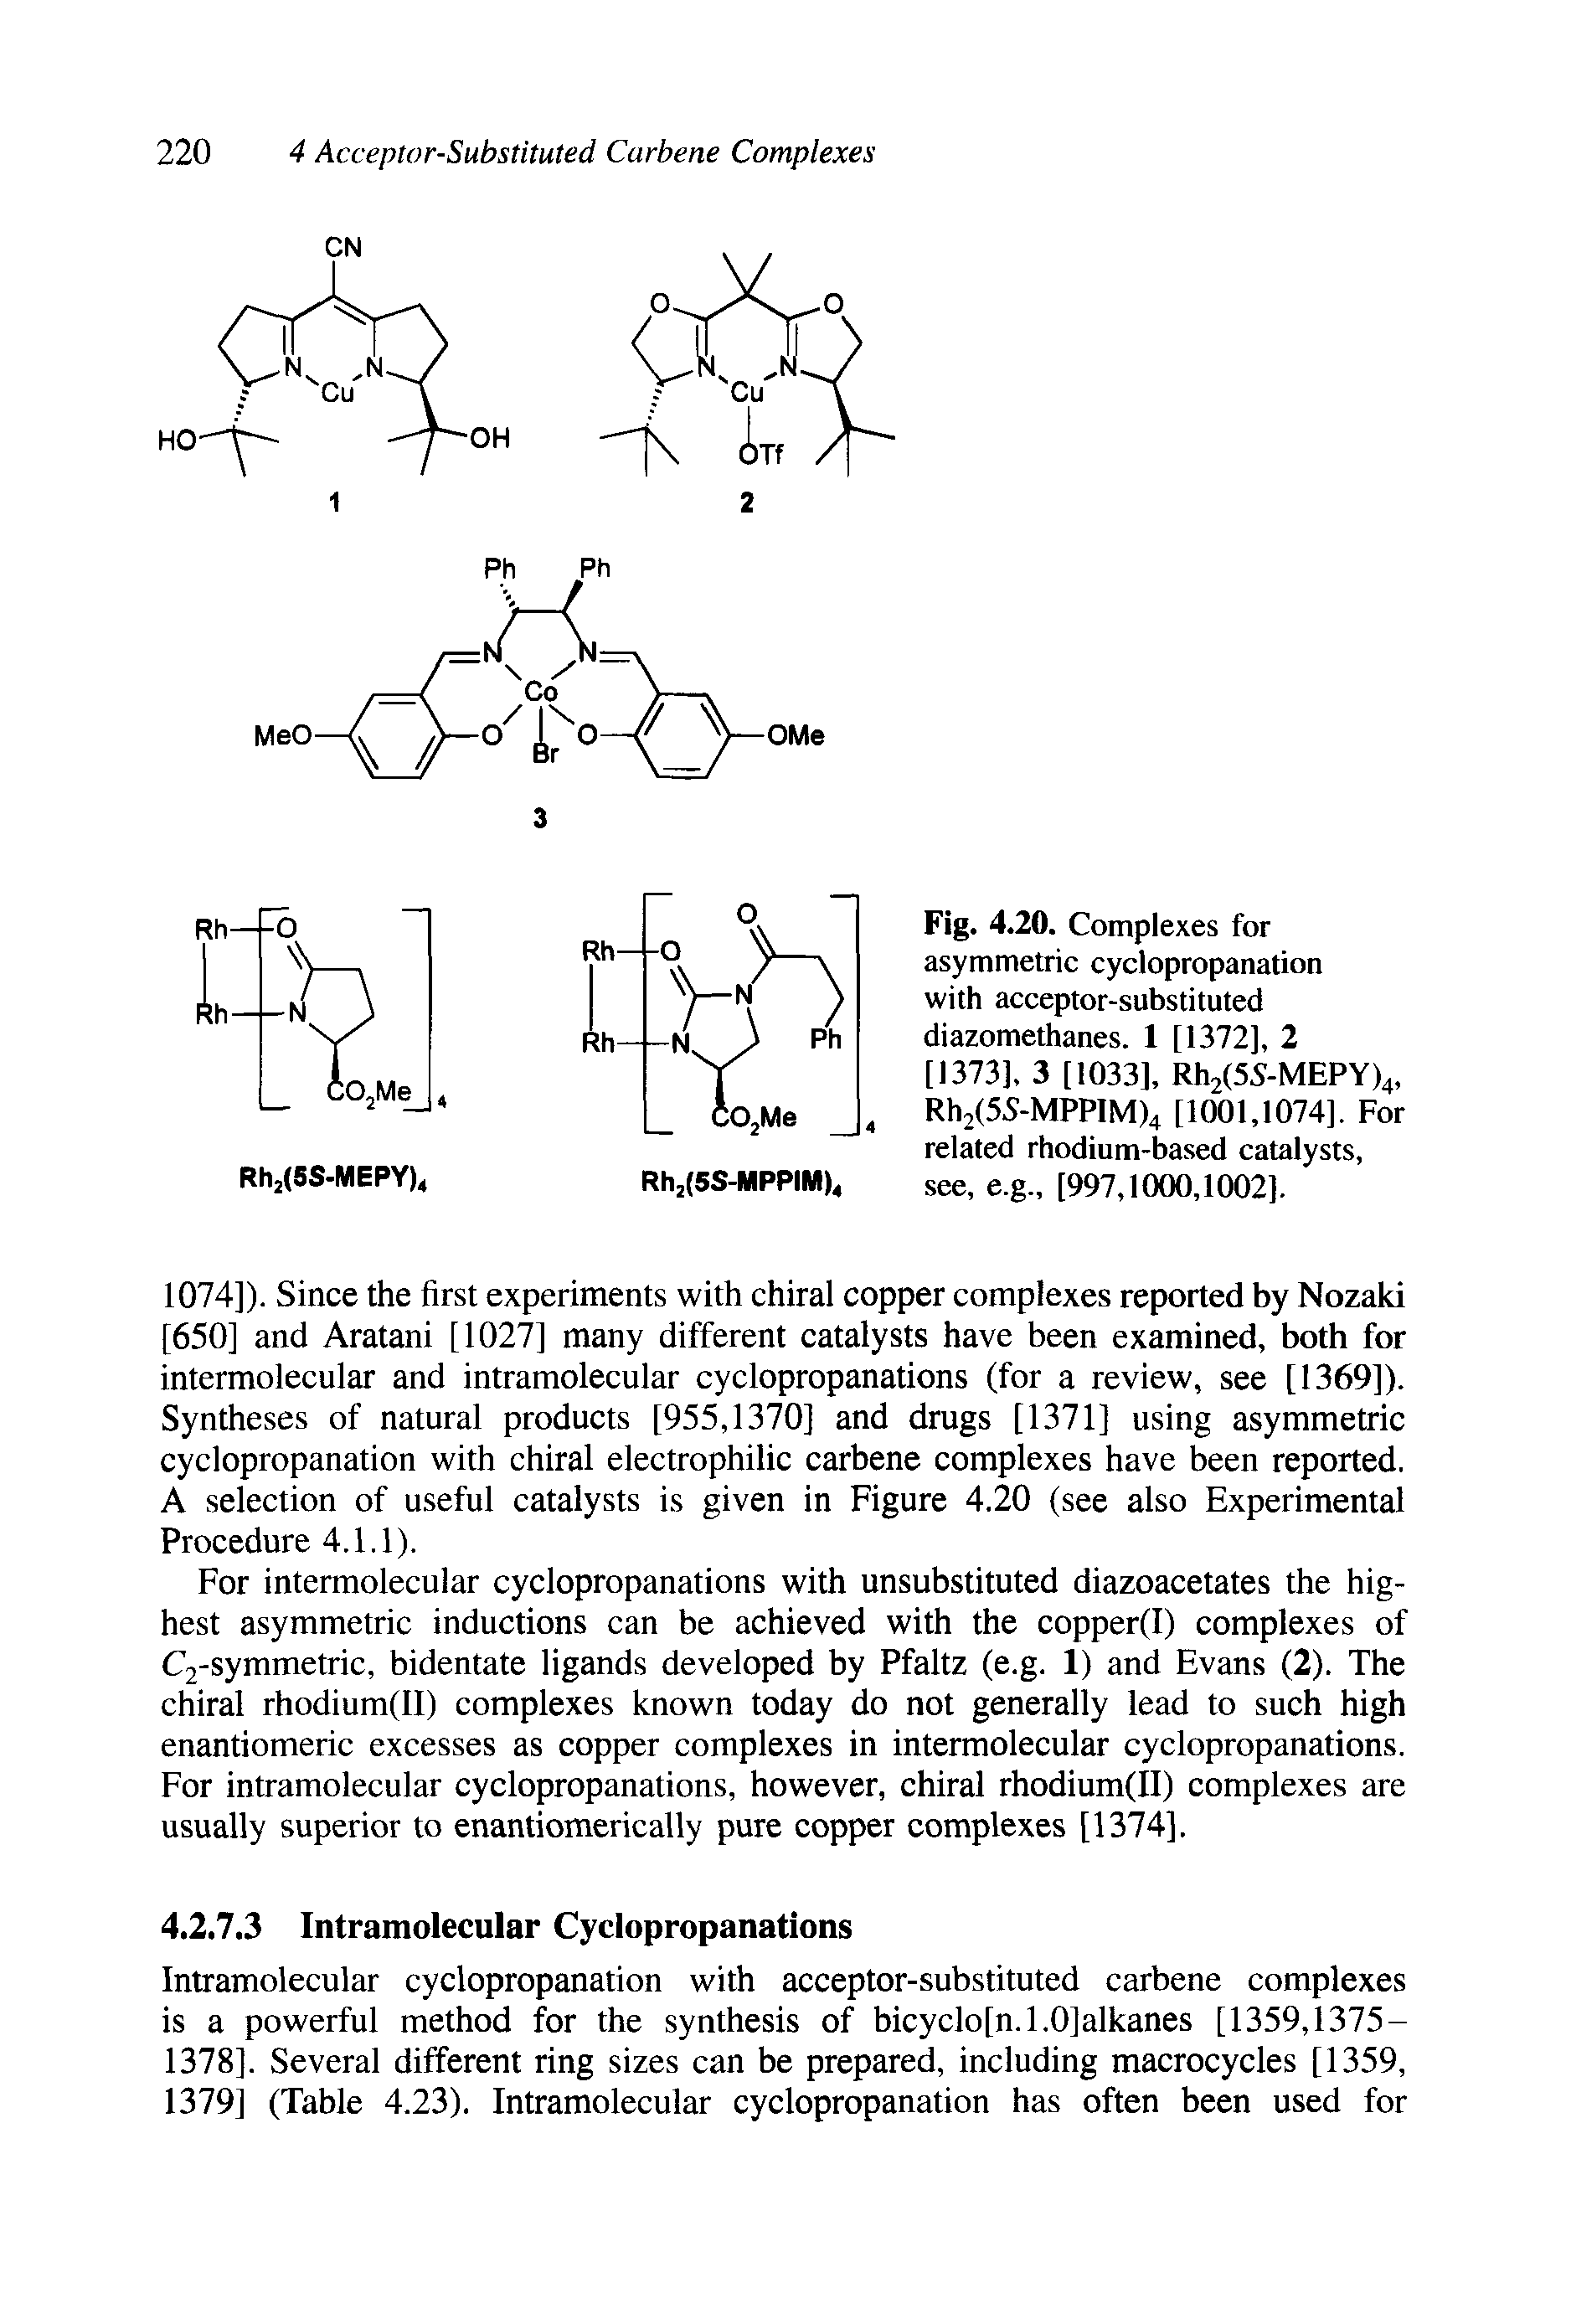 Fig. 4.20. Complexes for asymmetric cyclopropanation with acceptor-substituted diazomethanes. 1 [1372], 2 [1373], 3 [1033], Rh2(55-MEPY>4, Rh2(55-MPPIM)4 [1001,1074], For related rhodium-based catalysts, see, e.g., [997,1000,1002].